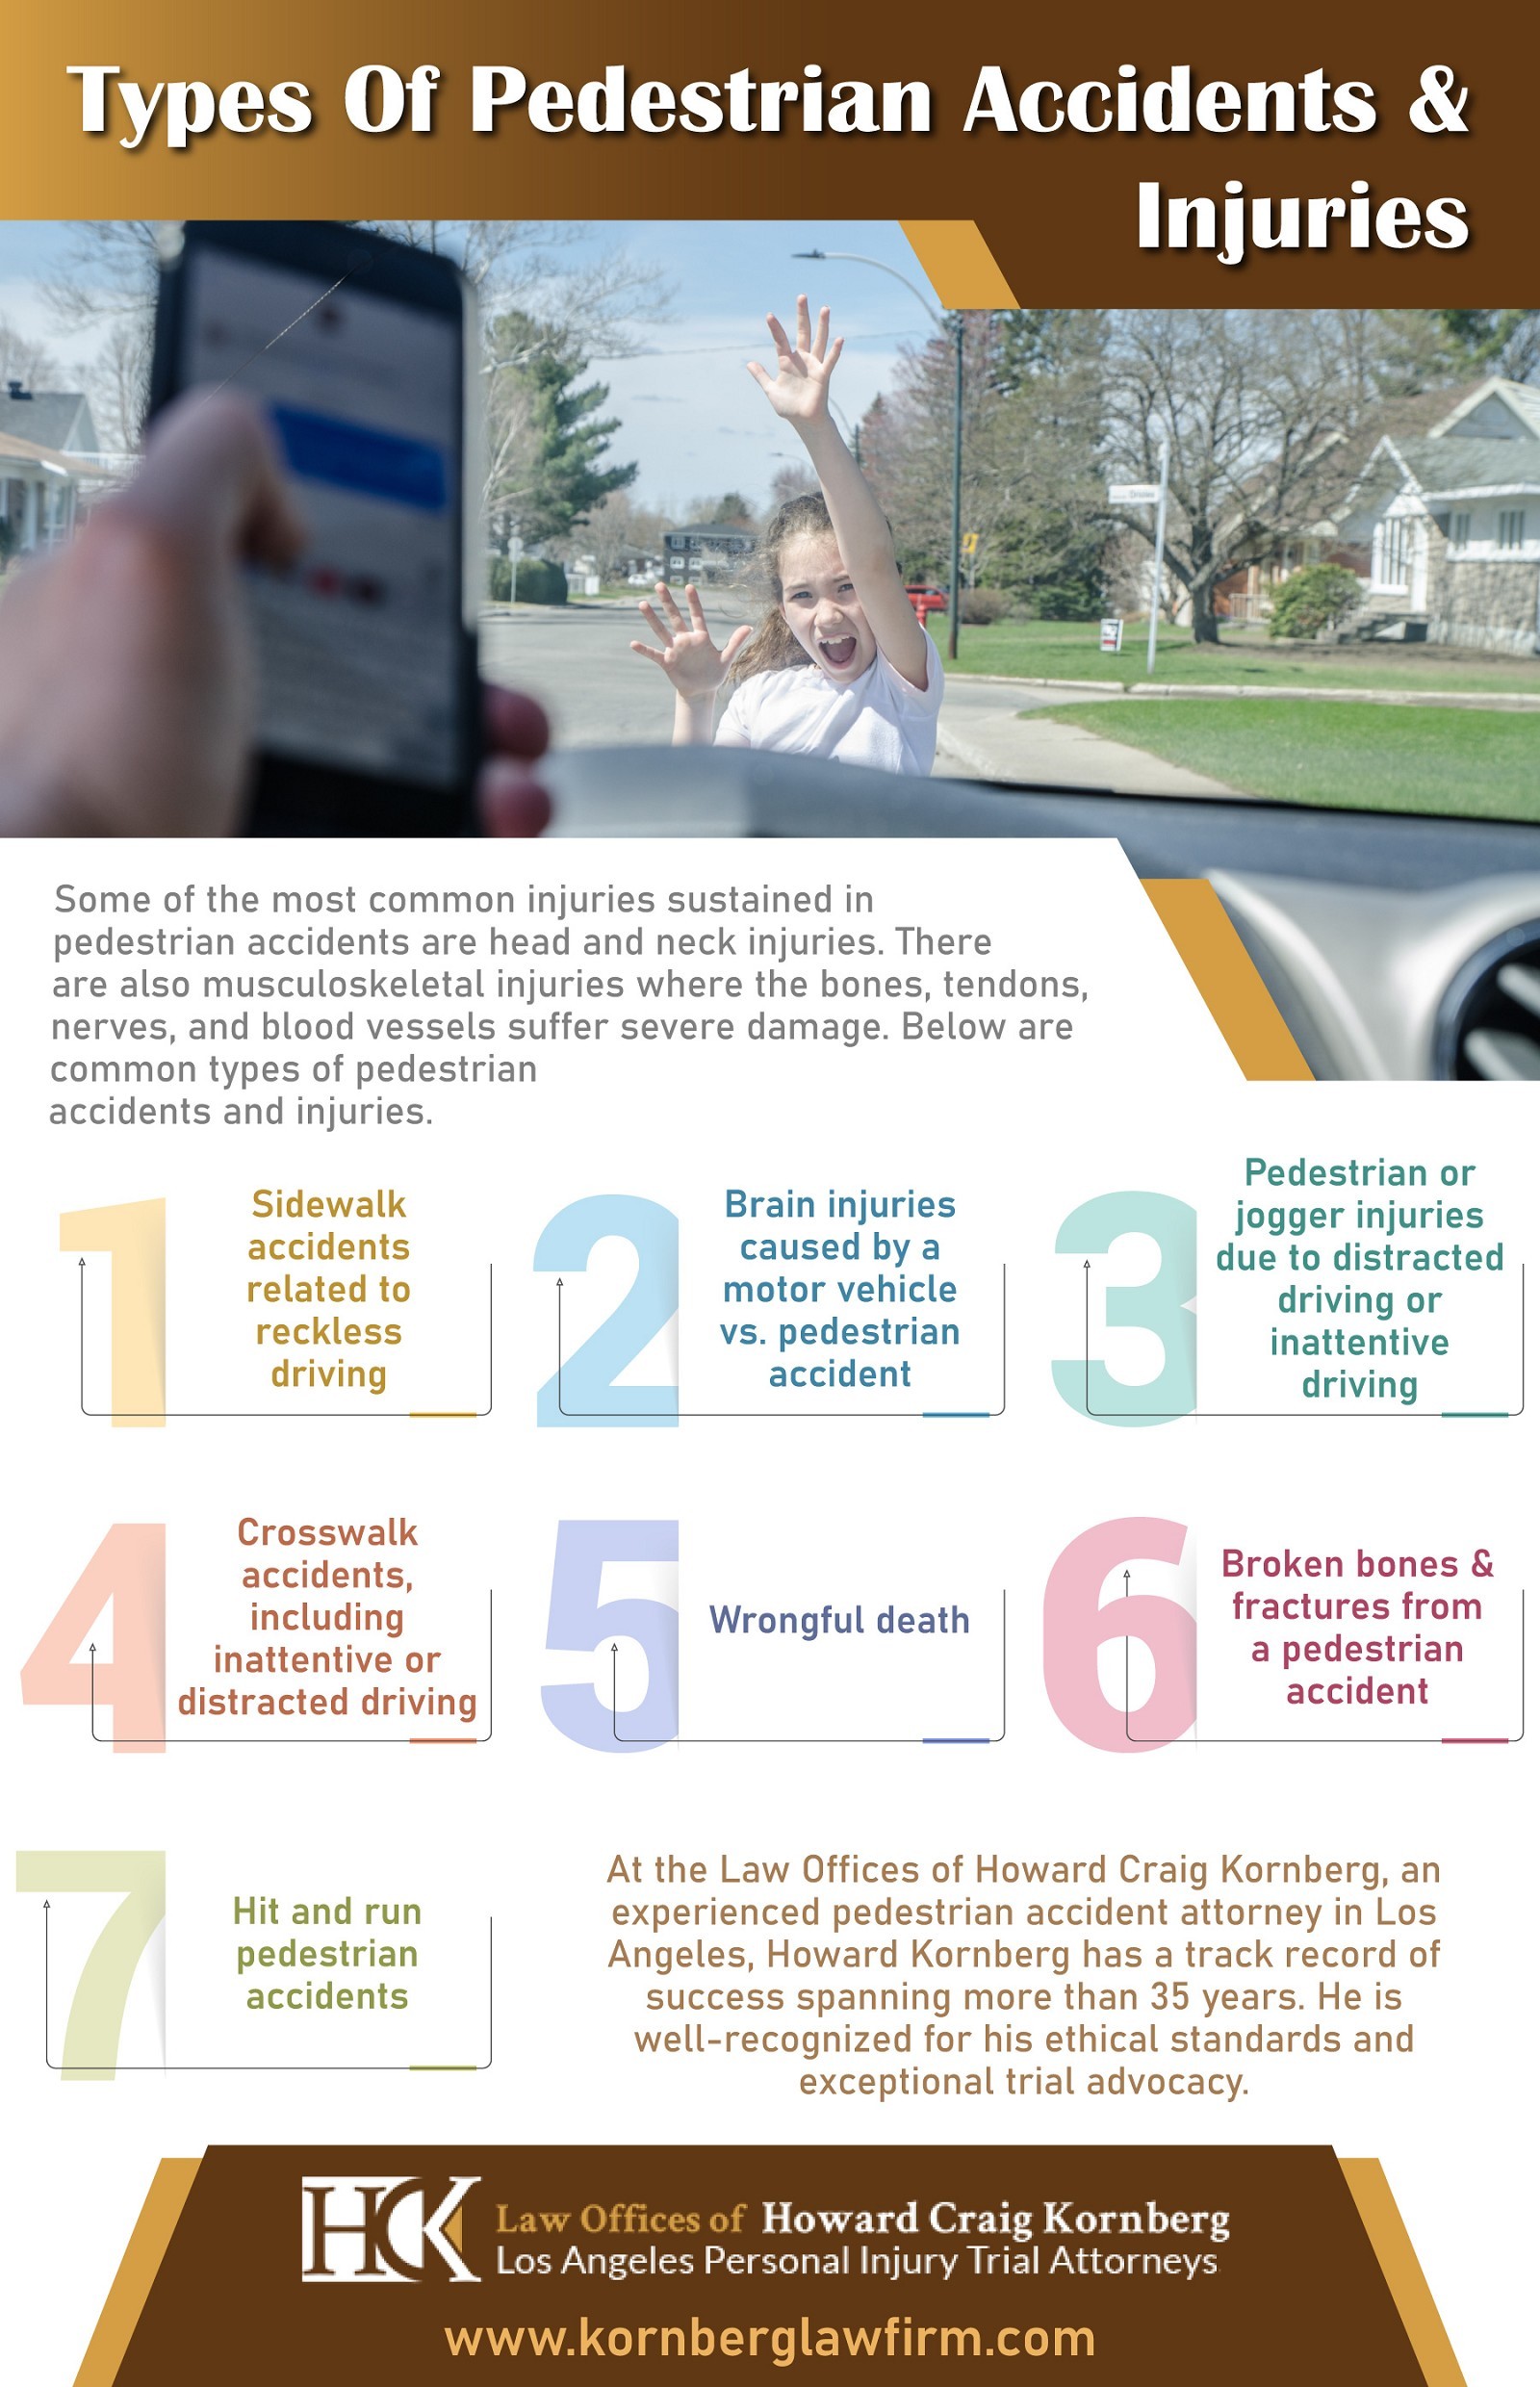 Types of Pedestrian Accidents and Injuries